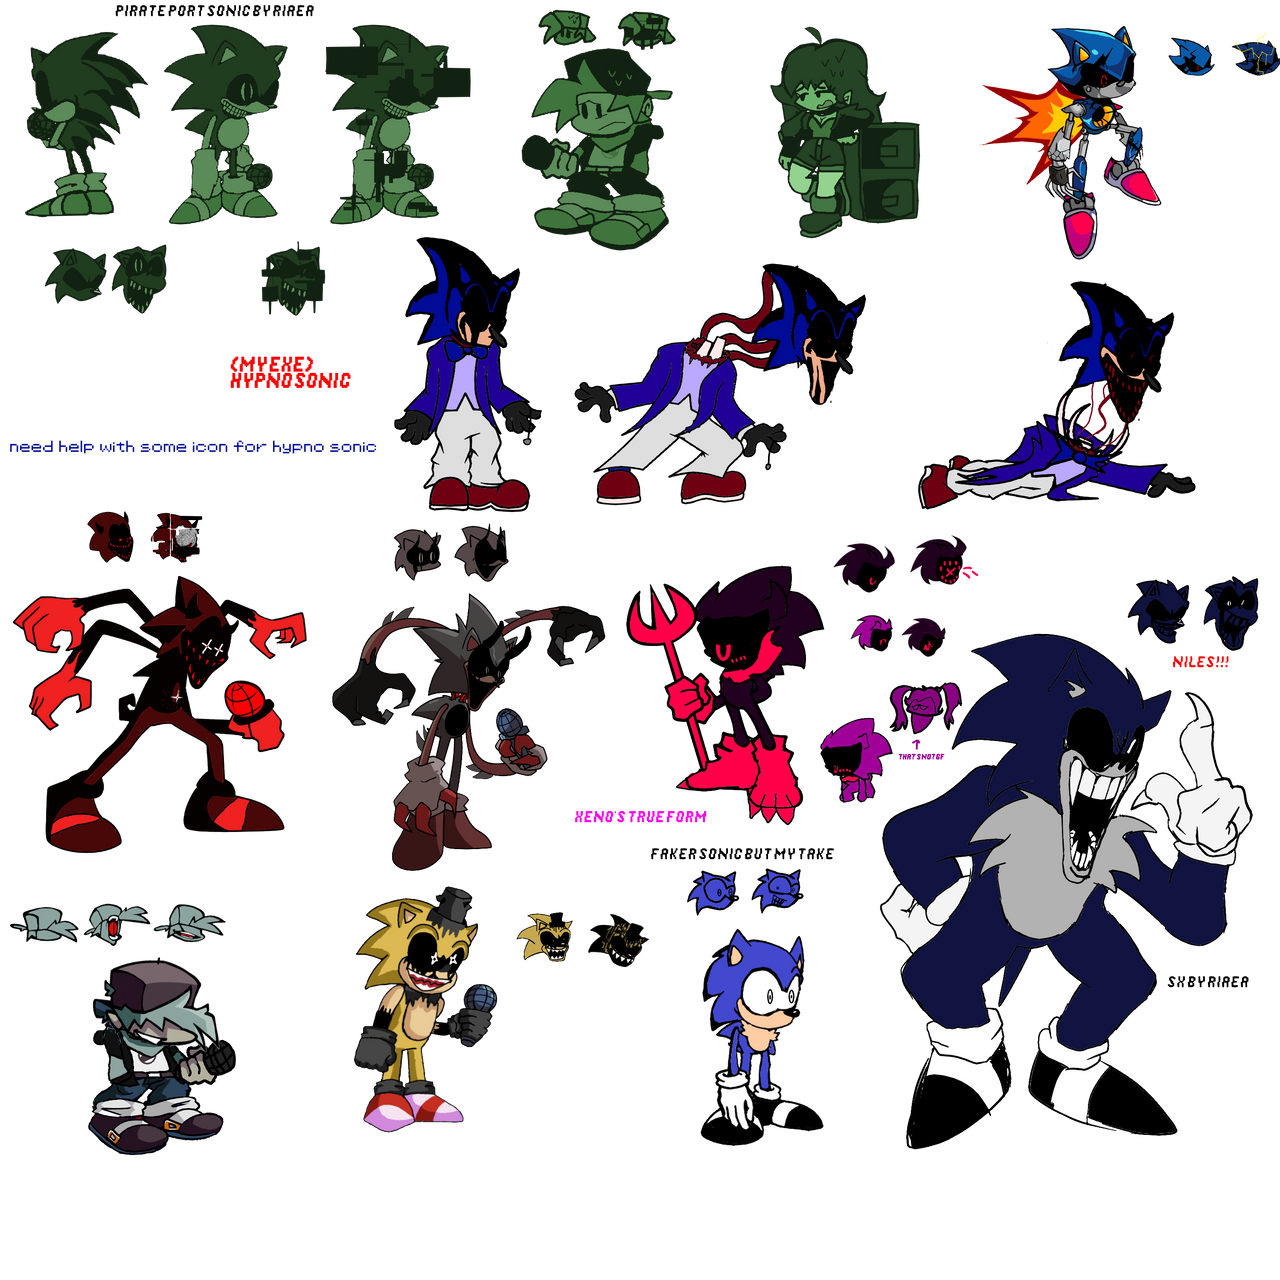 Sonic EXE in a nutshell by TheSonicResource on DeviantArt